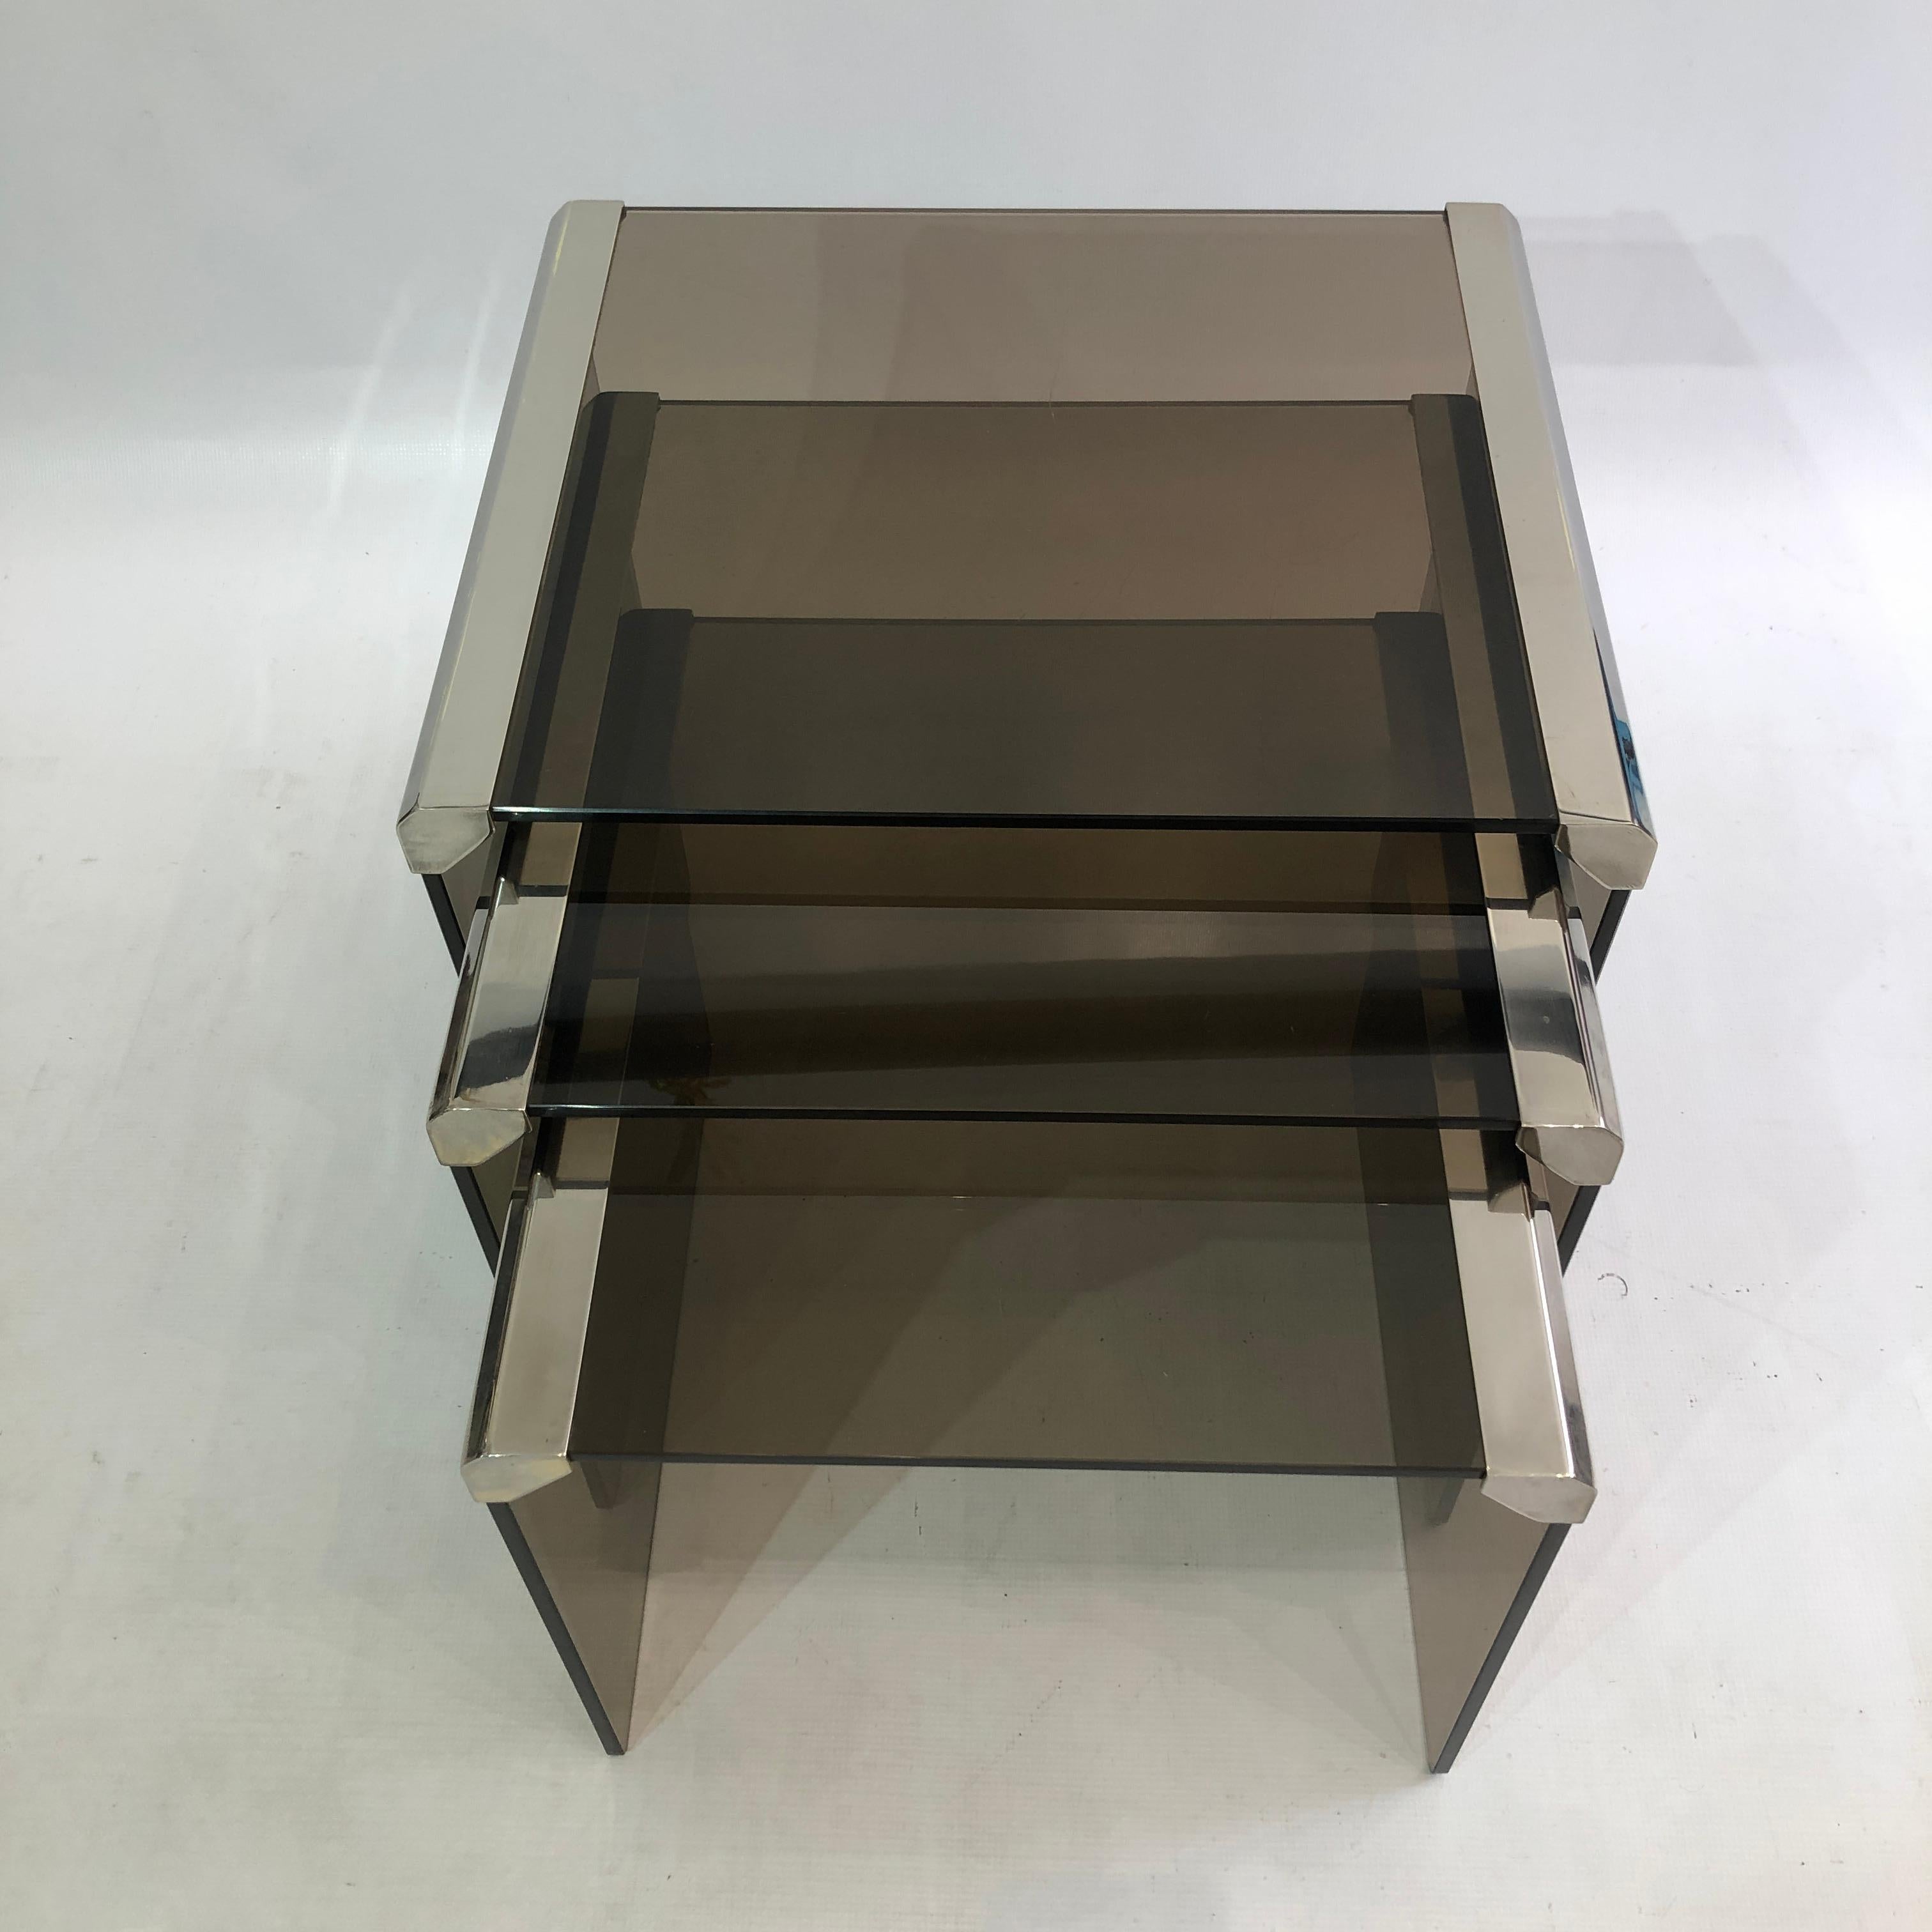 Gallotti & Radice Chrome Smoked Glass Nesting Tables 1980s Coffee Vintage Retro In Good Condition For Sale In London, GB